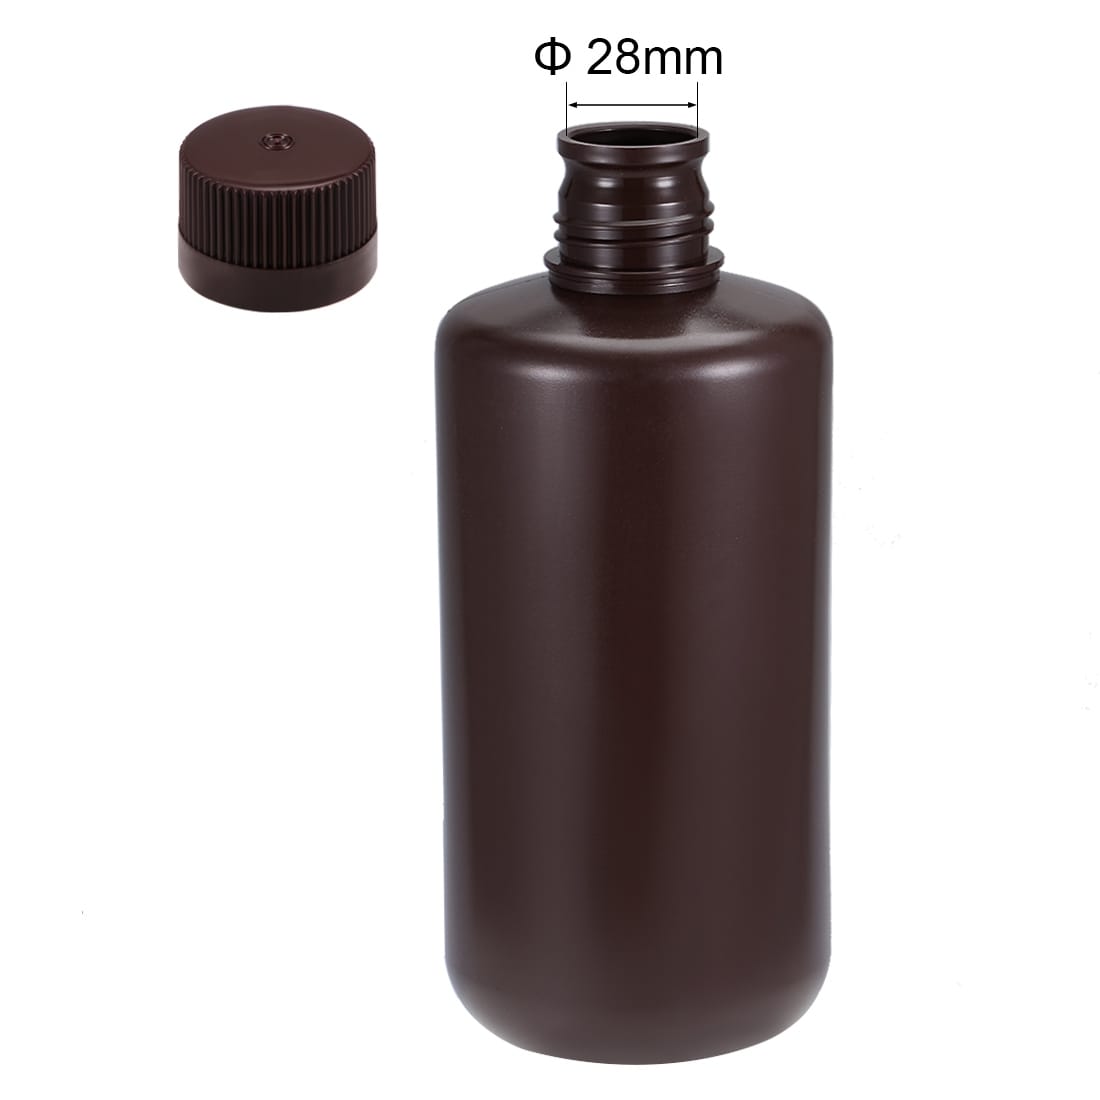 https://ak1.ostkcdn.com/images/products/is/images/direct/0cf5db6b706b78e612f58d4fc8a66b6ff252912d/Plastic-Reagent-Bottle-1000ml-Sample-Sealing-Liquid-Storage-Container-Brown-2pcs.jpg